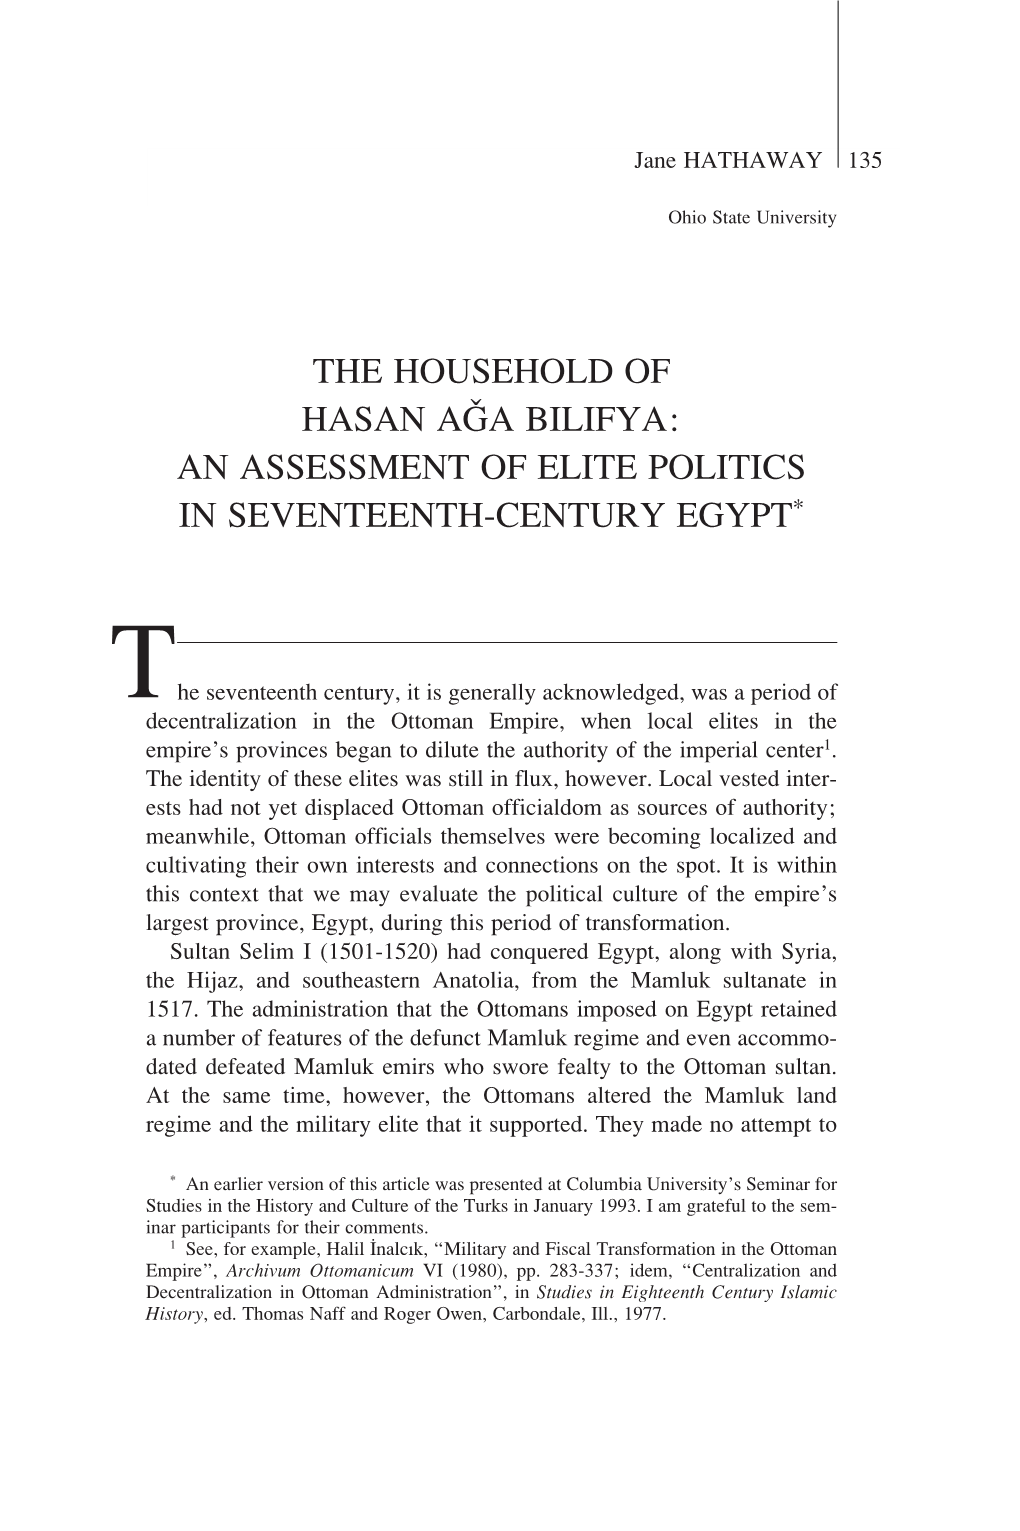 The Household of Hasan Aga Bilifya: an Assessment of Elite Politics in Seventeenth-Century Egypt*